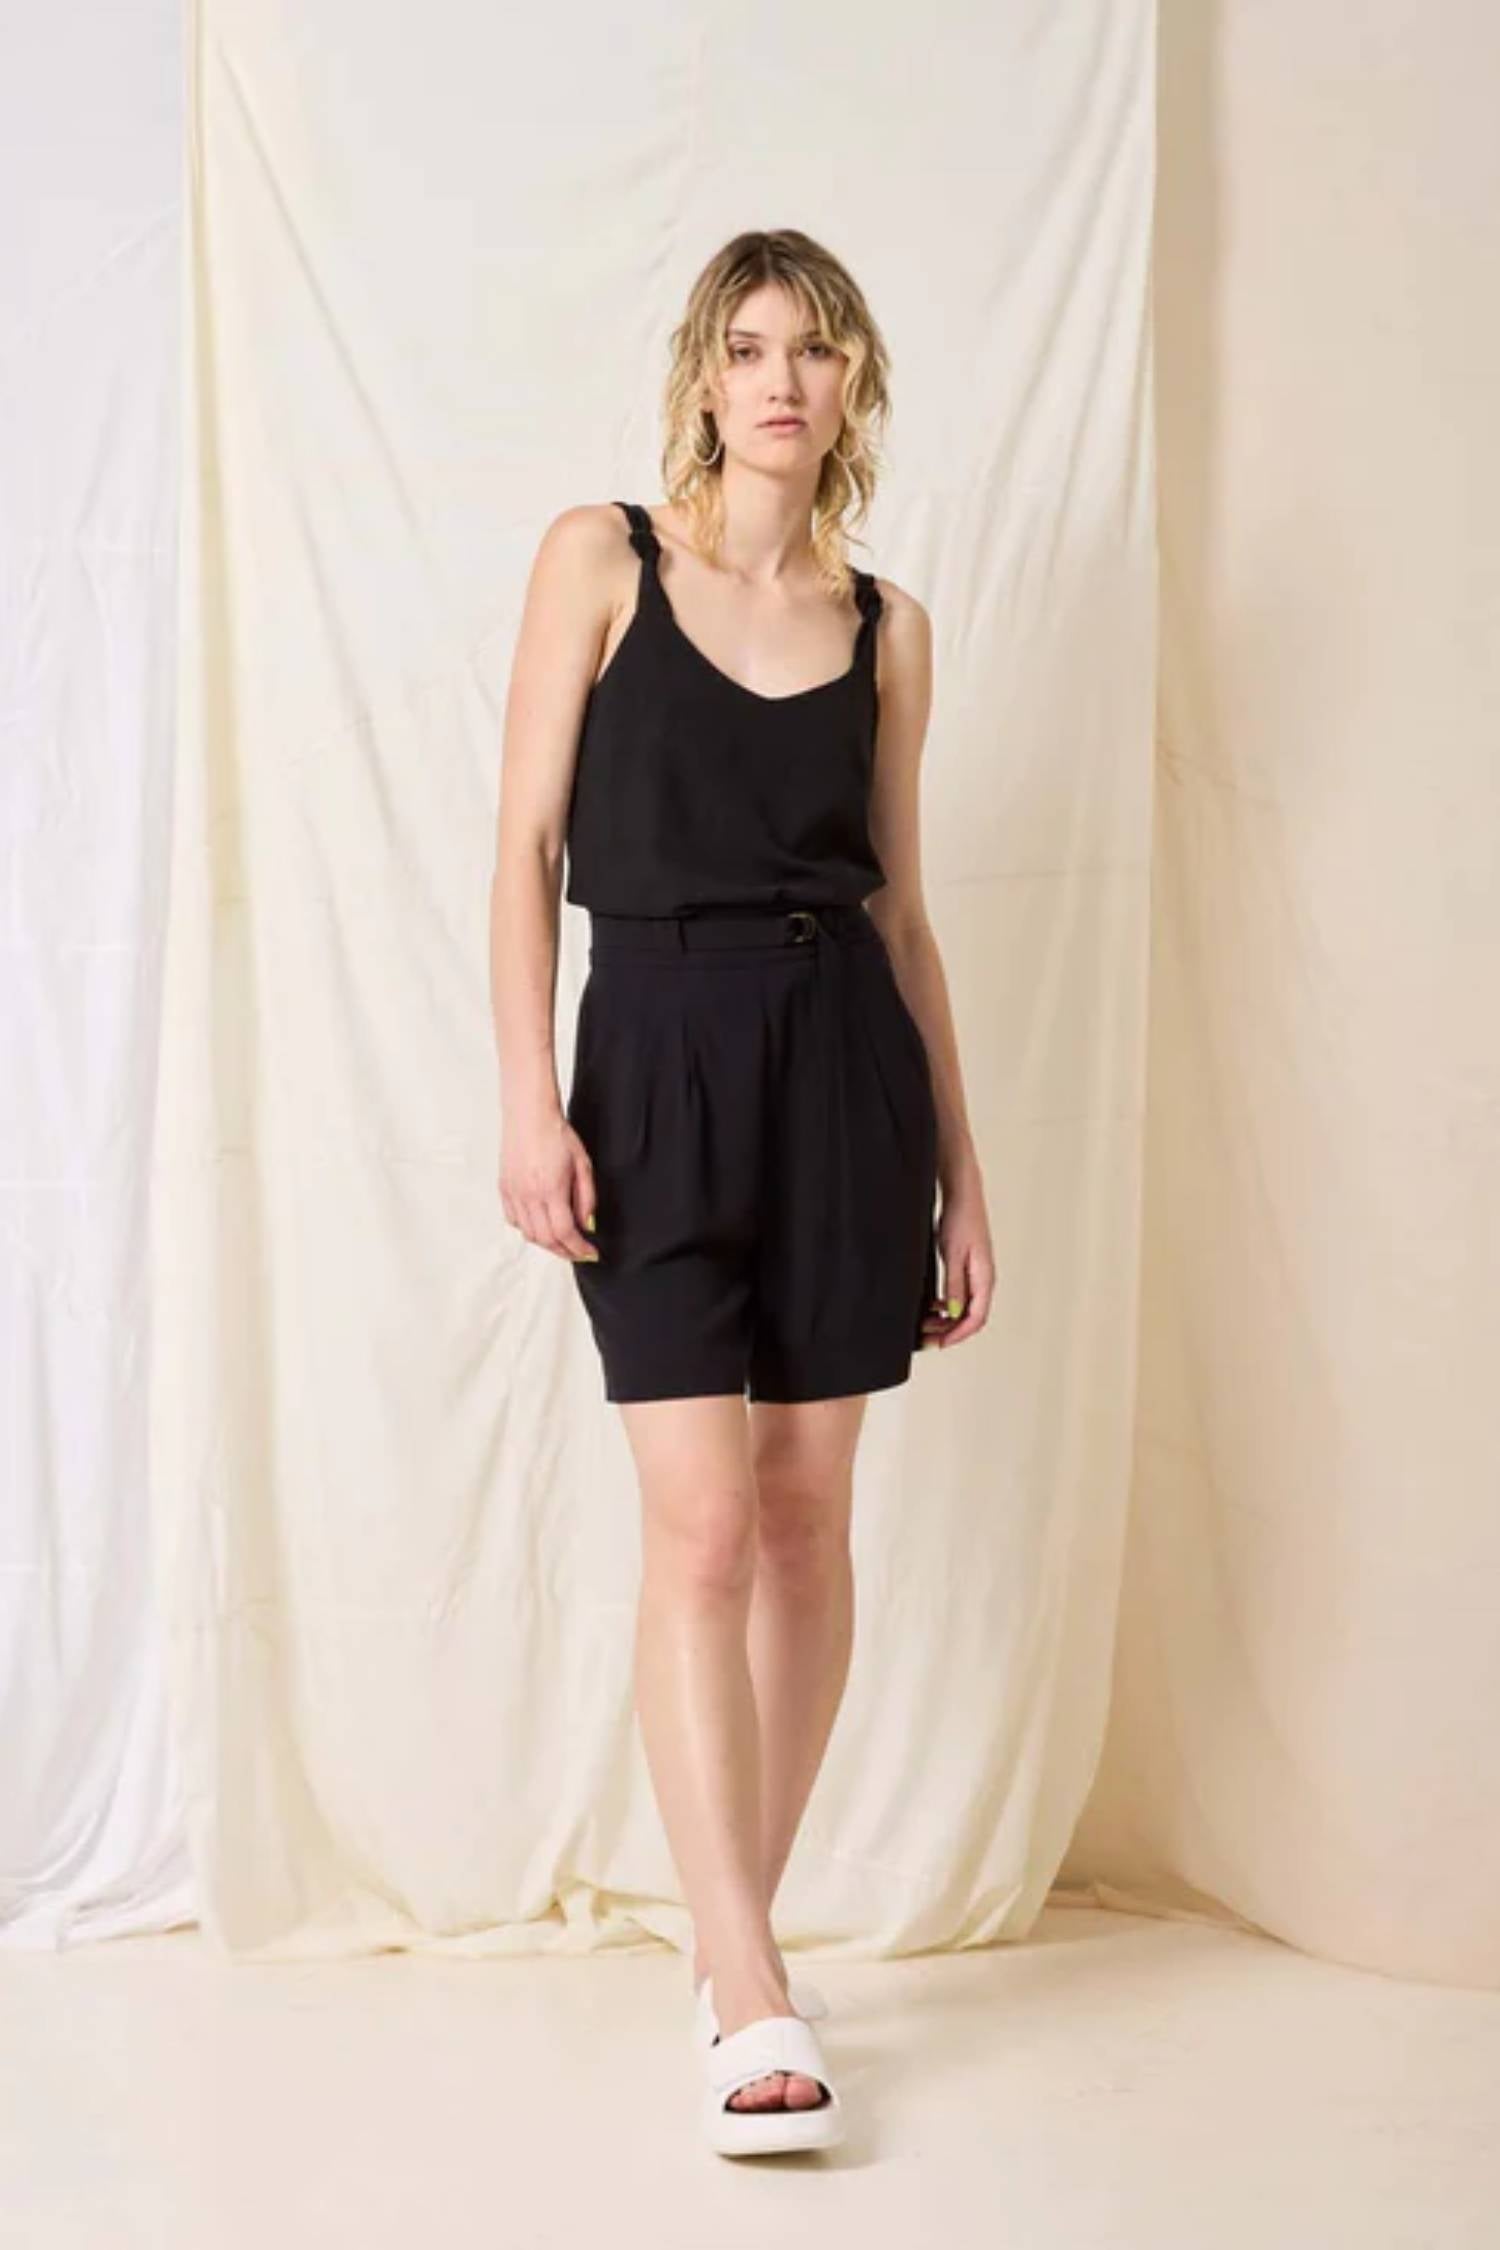 Kamala Short by Cokluch, Black, high waist, paper-bag effect, ring belt, front pleats, button closure at waist, pockets, eco-fabric, OEKO-TEX certified, sizes XS to XL, made in Montreal